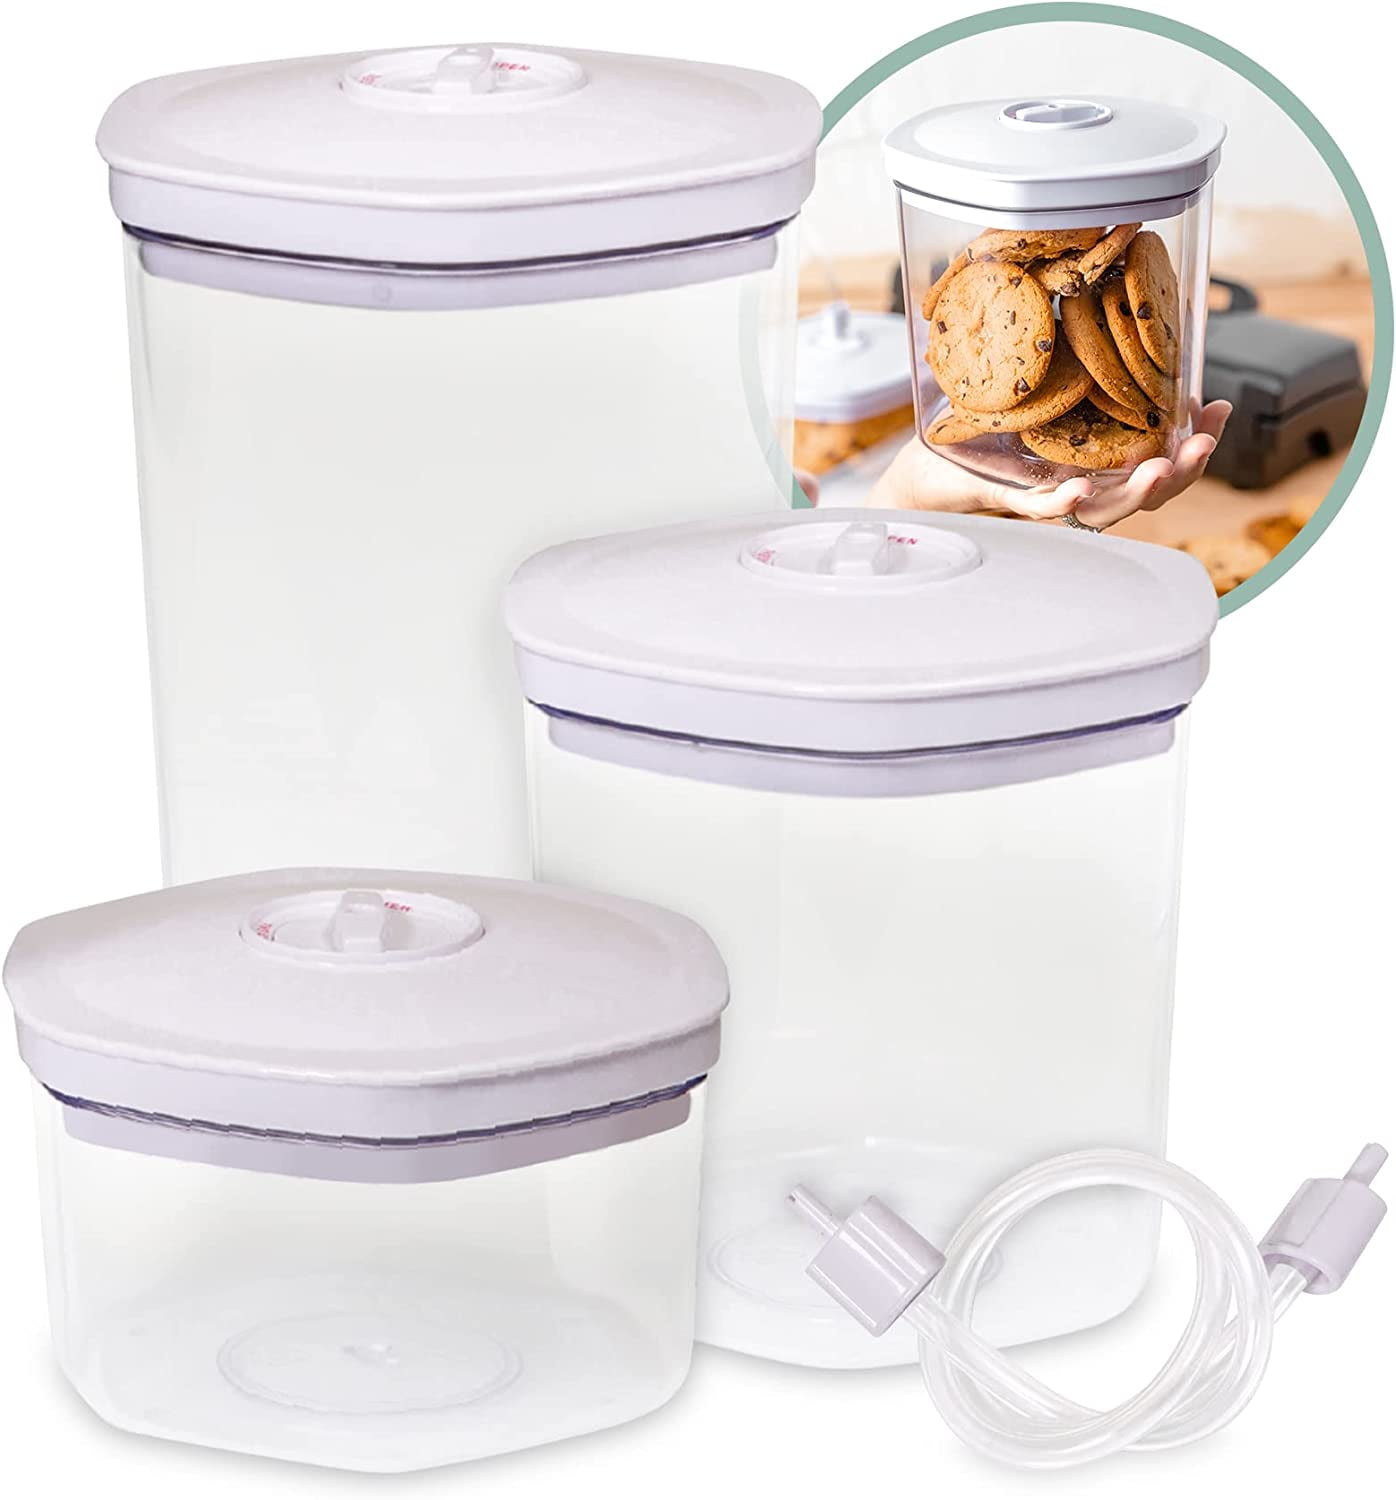  BBAUER Food Saver Vacuum Containers, Spill-Proof Vacuum Sealed  Container, 3-Piece Set of Airtight Storage Organizer, Leakproof Airtight  Storage Containers, Reusable Containers for Vegetables, Fruits: Home &  Kitchen